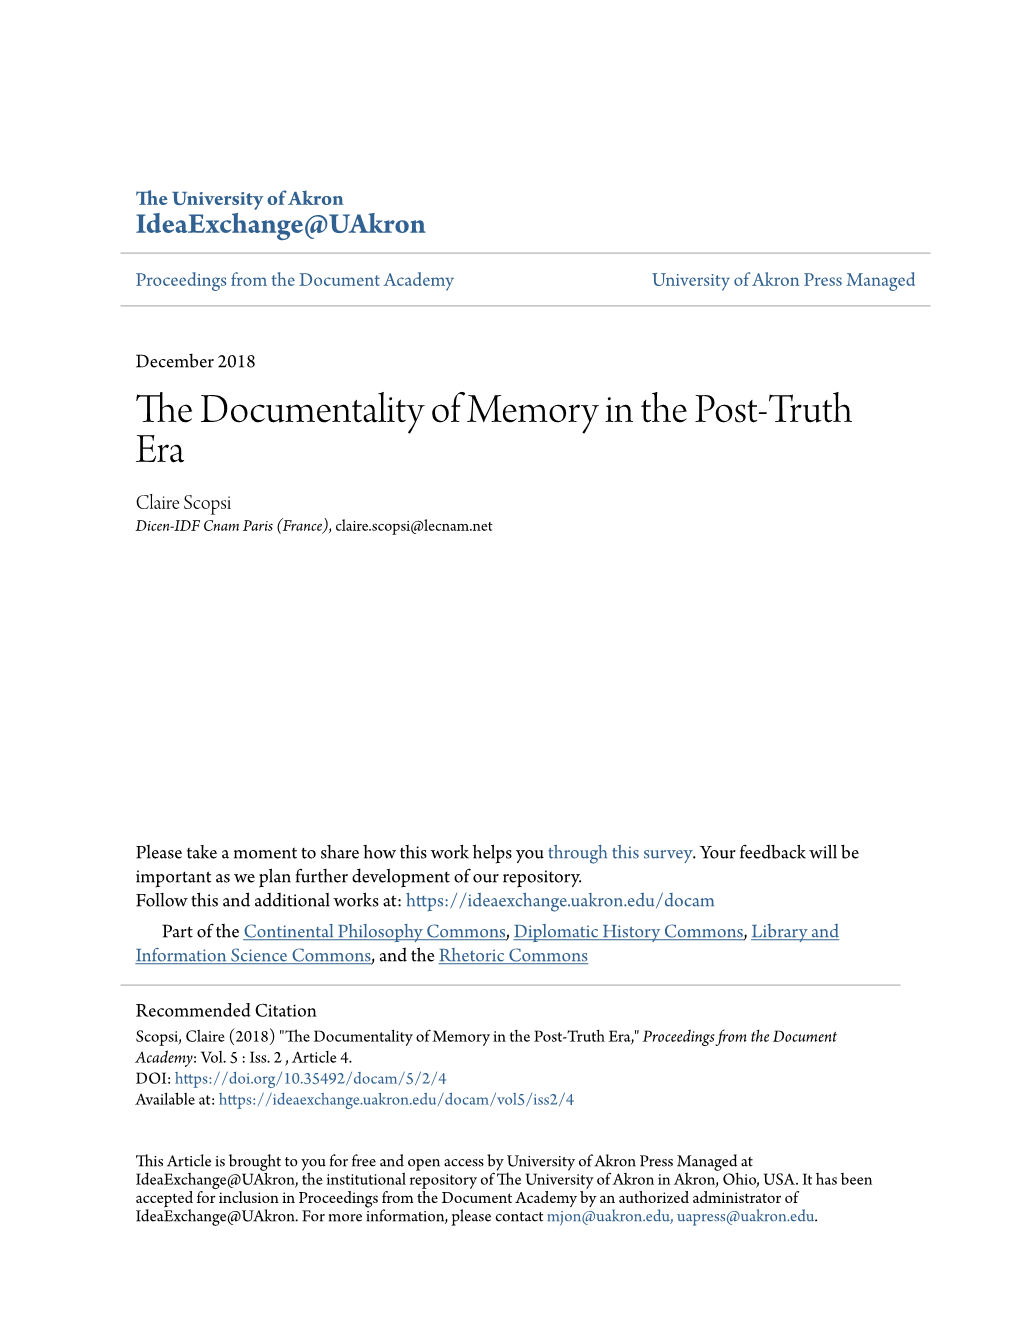 The Documentality of Memory in the Post-Truth